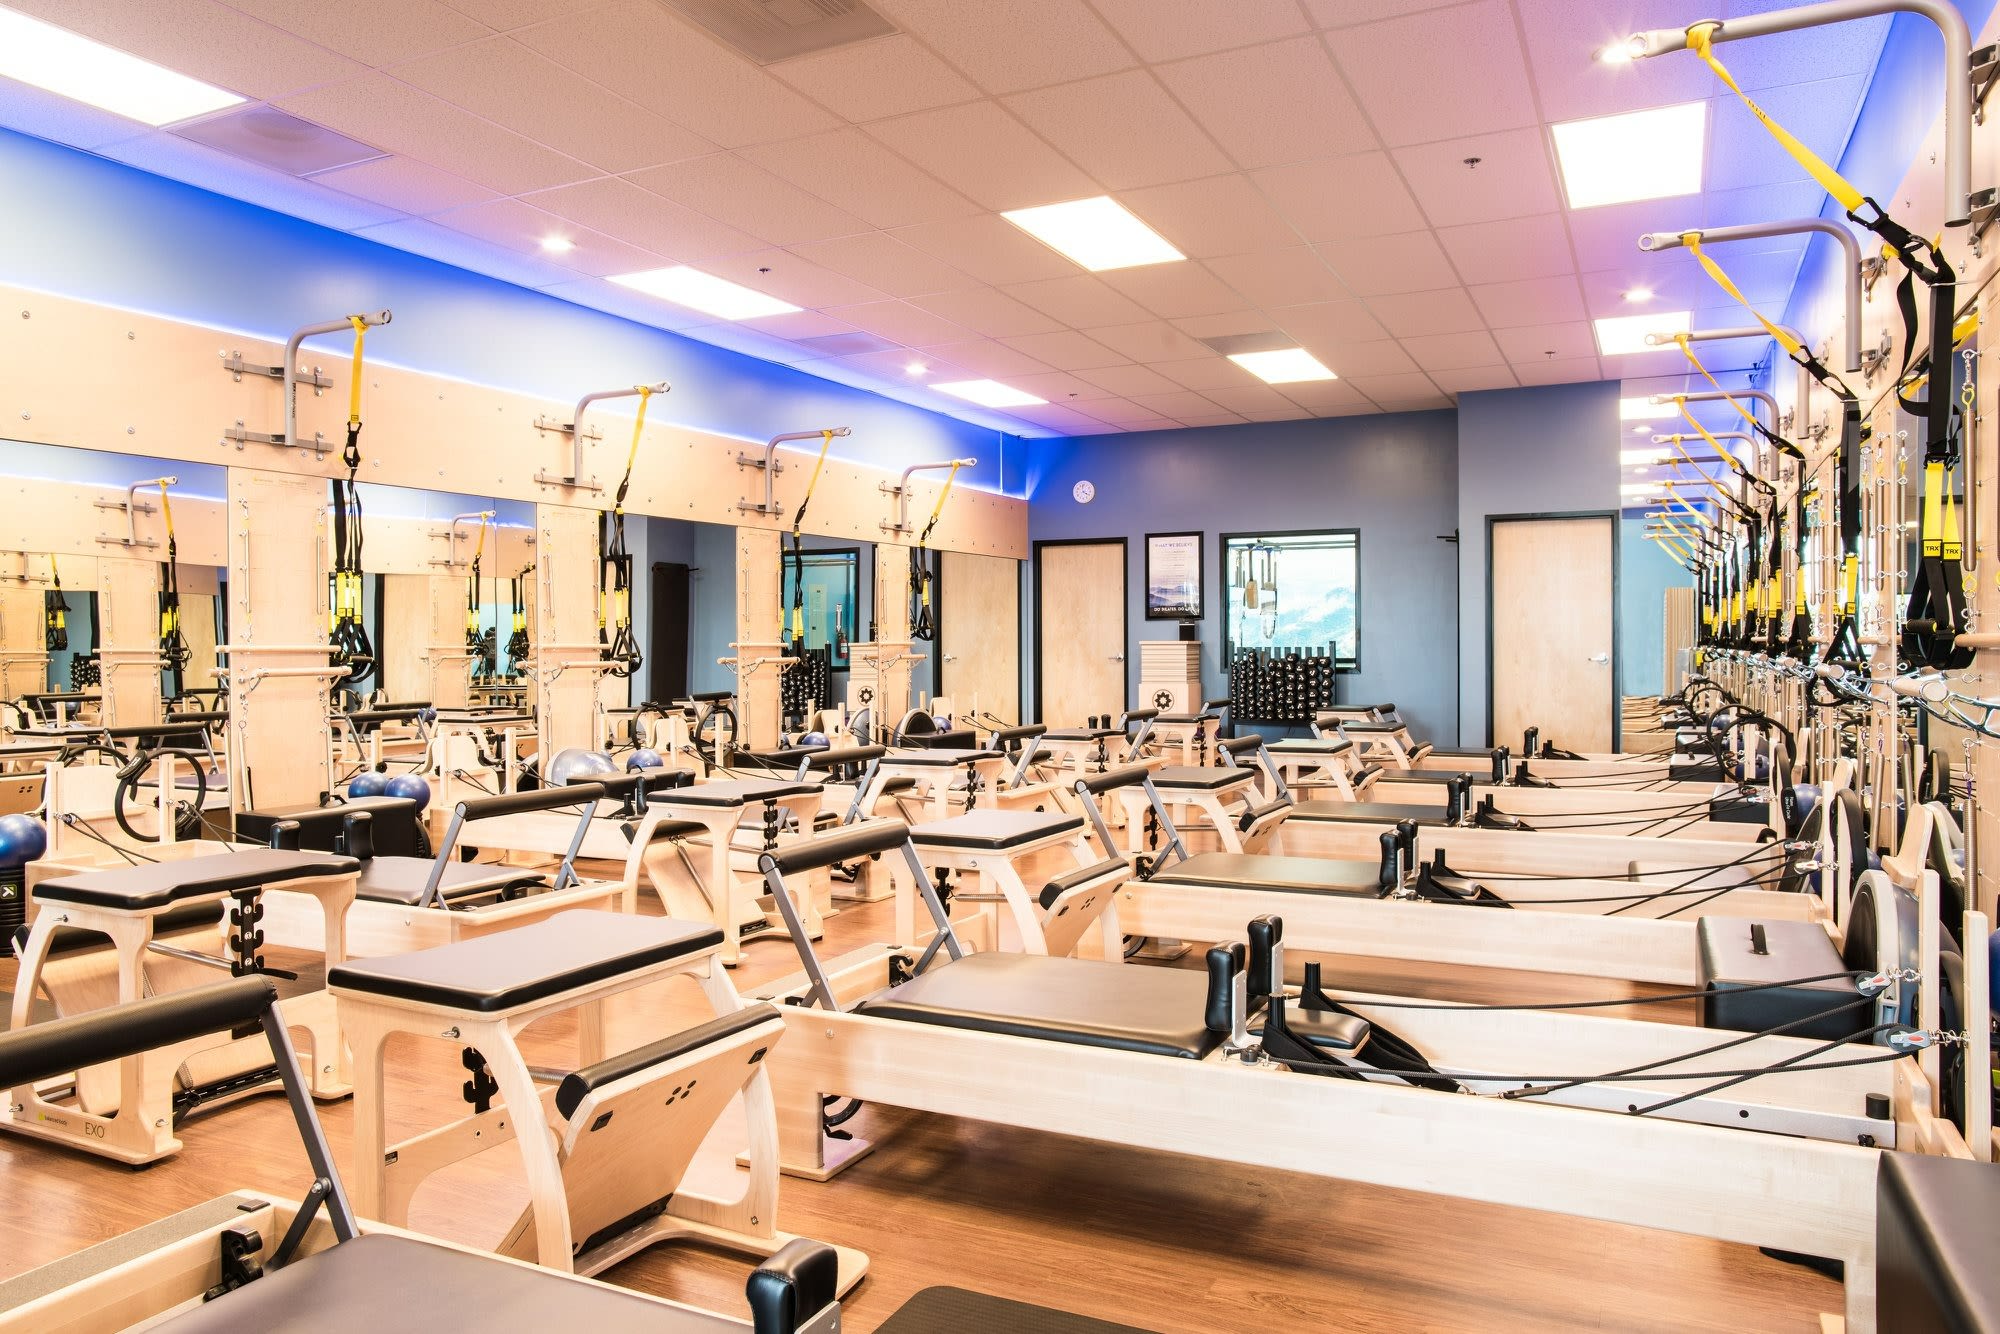 Club Pilates - Assembly Row: Read Reviews and Book Classes on